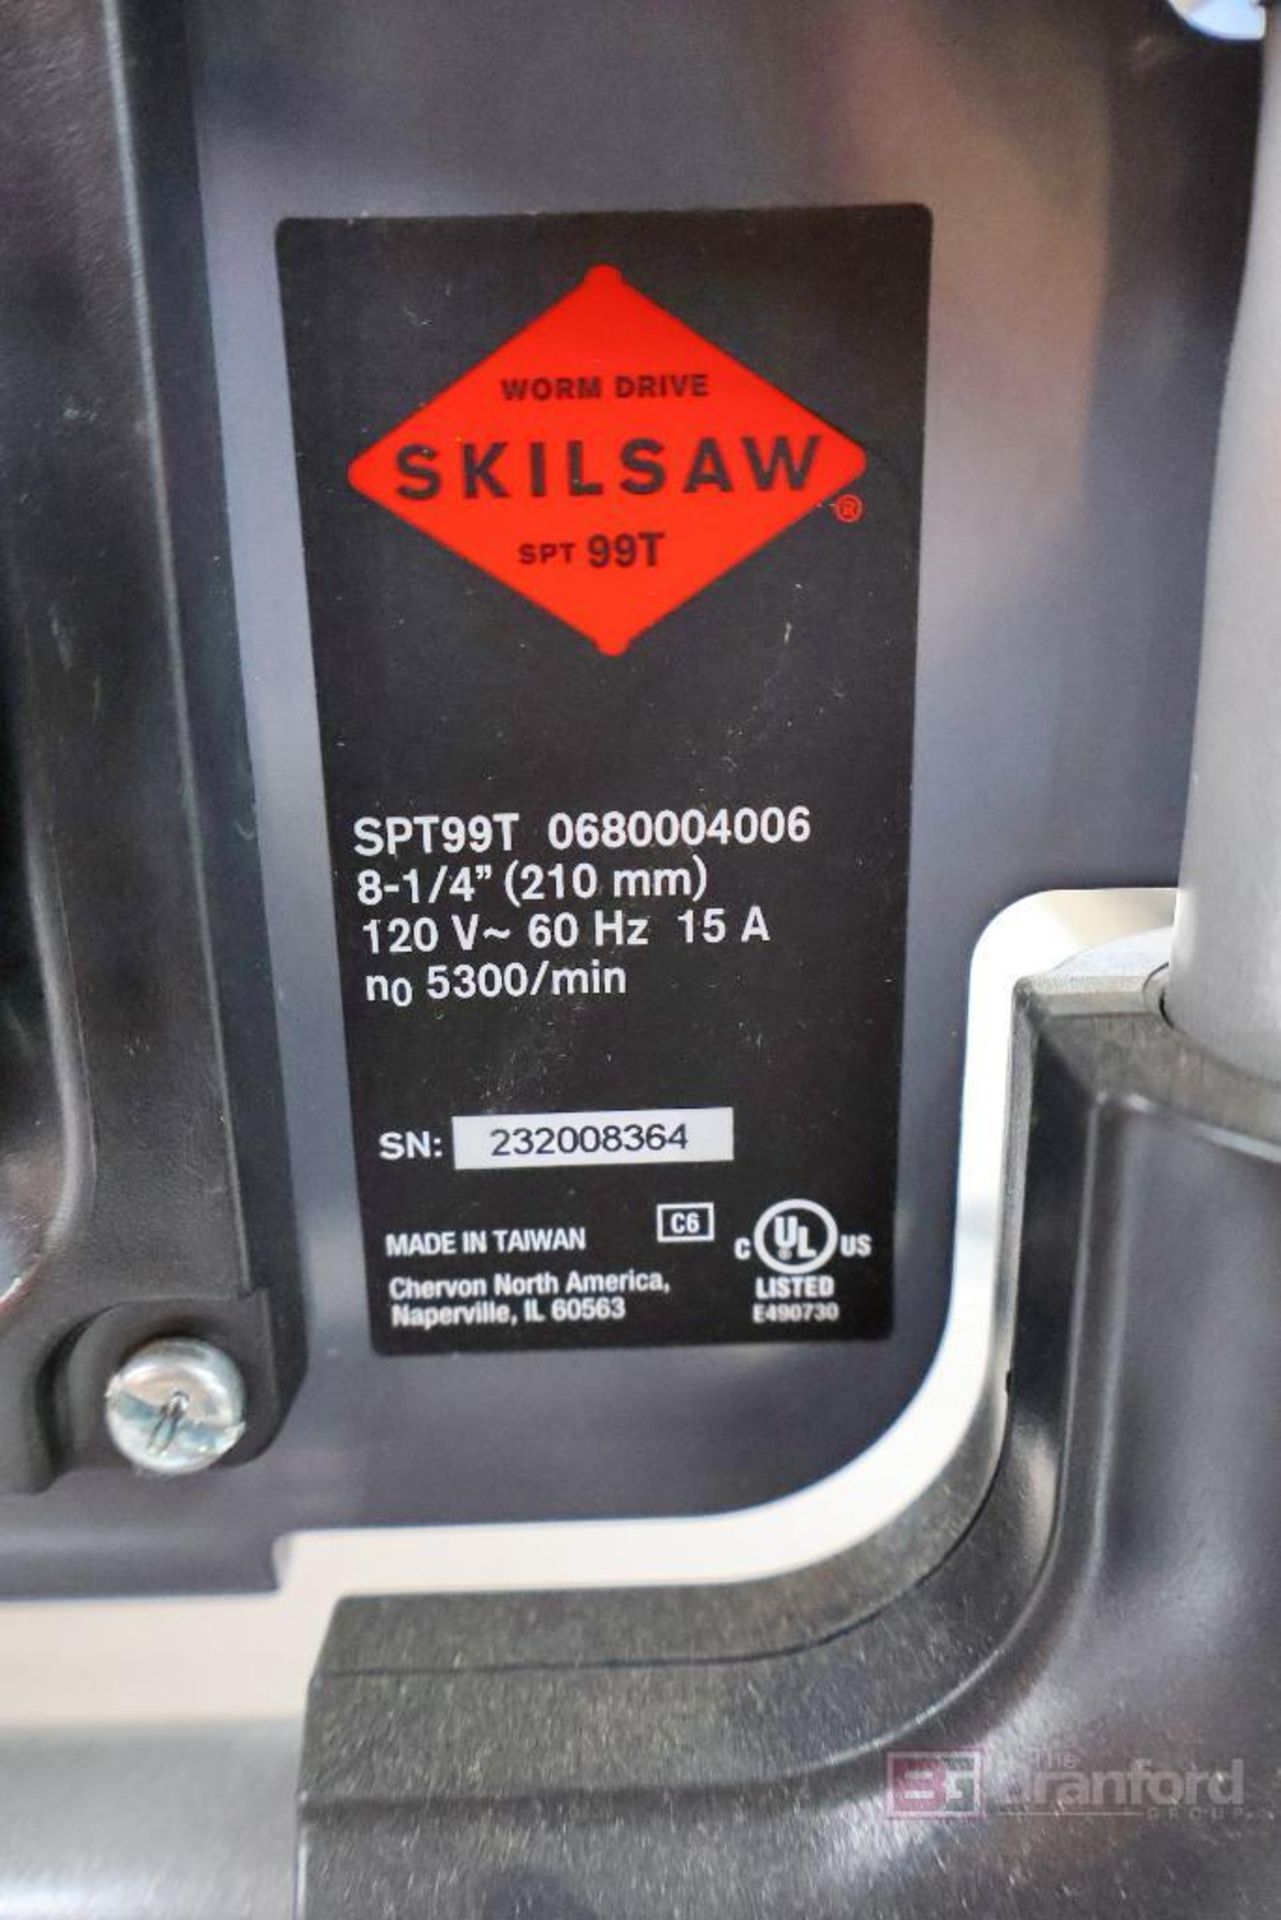 SKILSAW SPT 99 T-01 Portable Worm Drive Table Saw - Image 6 of 8